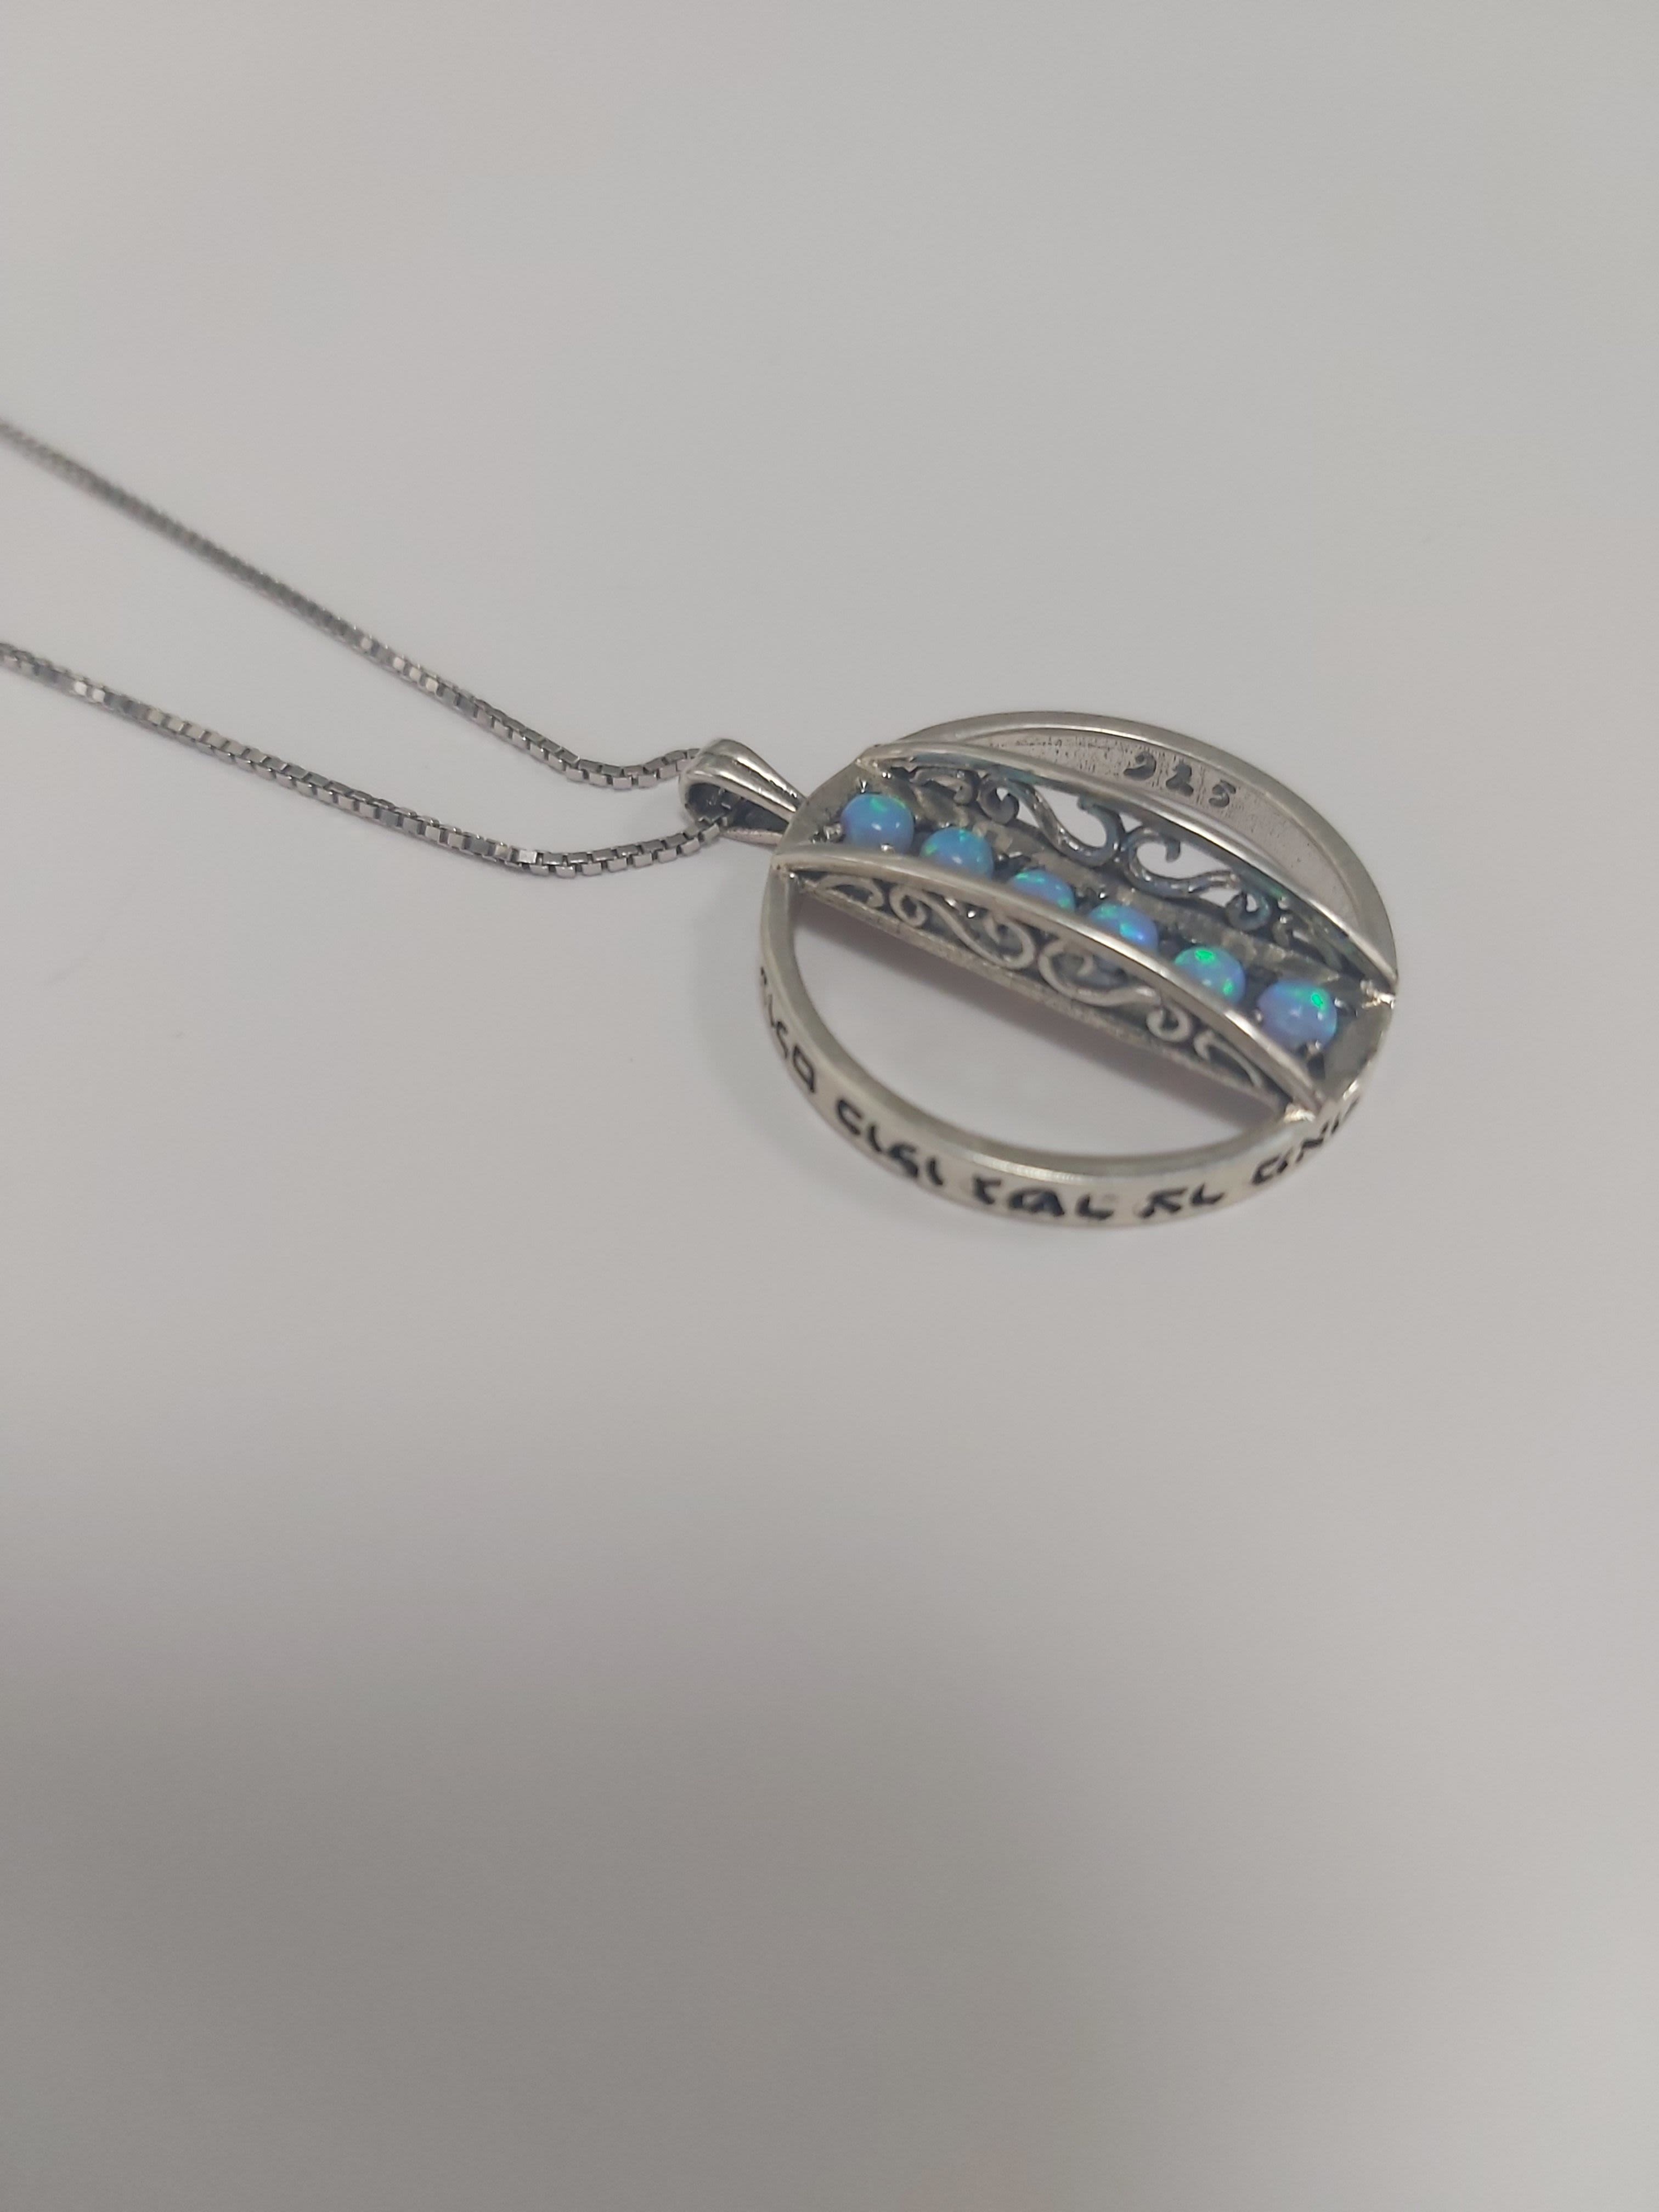 Pendant Necklace "The Whole World is a Narrow Bridge" - Pure Silver